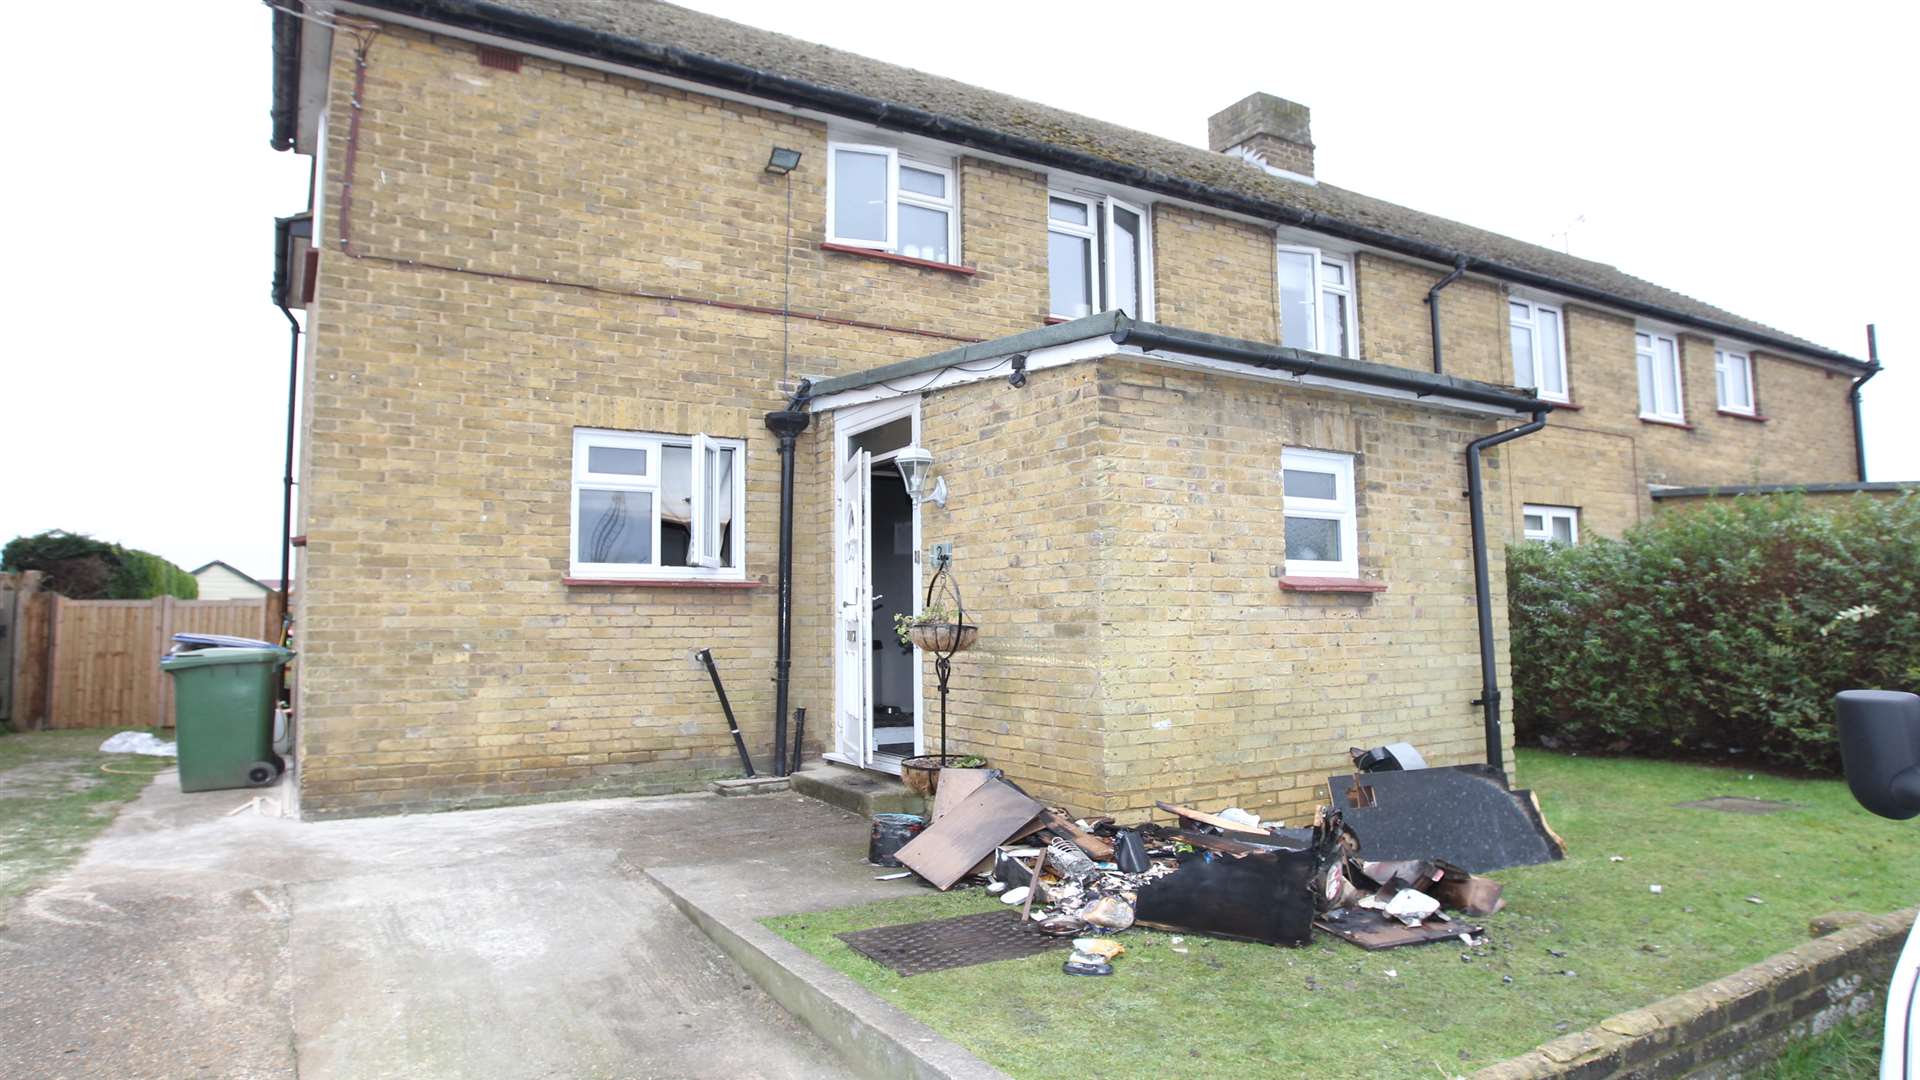 The property was damaged by a fire that started in the kitchen